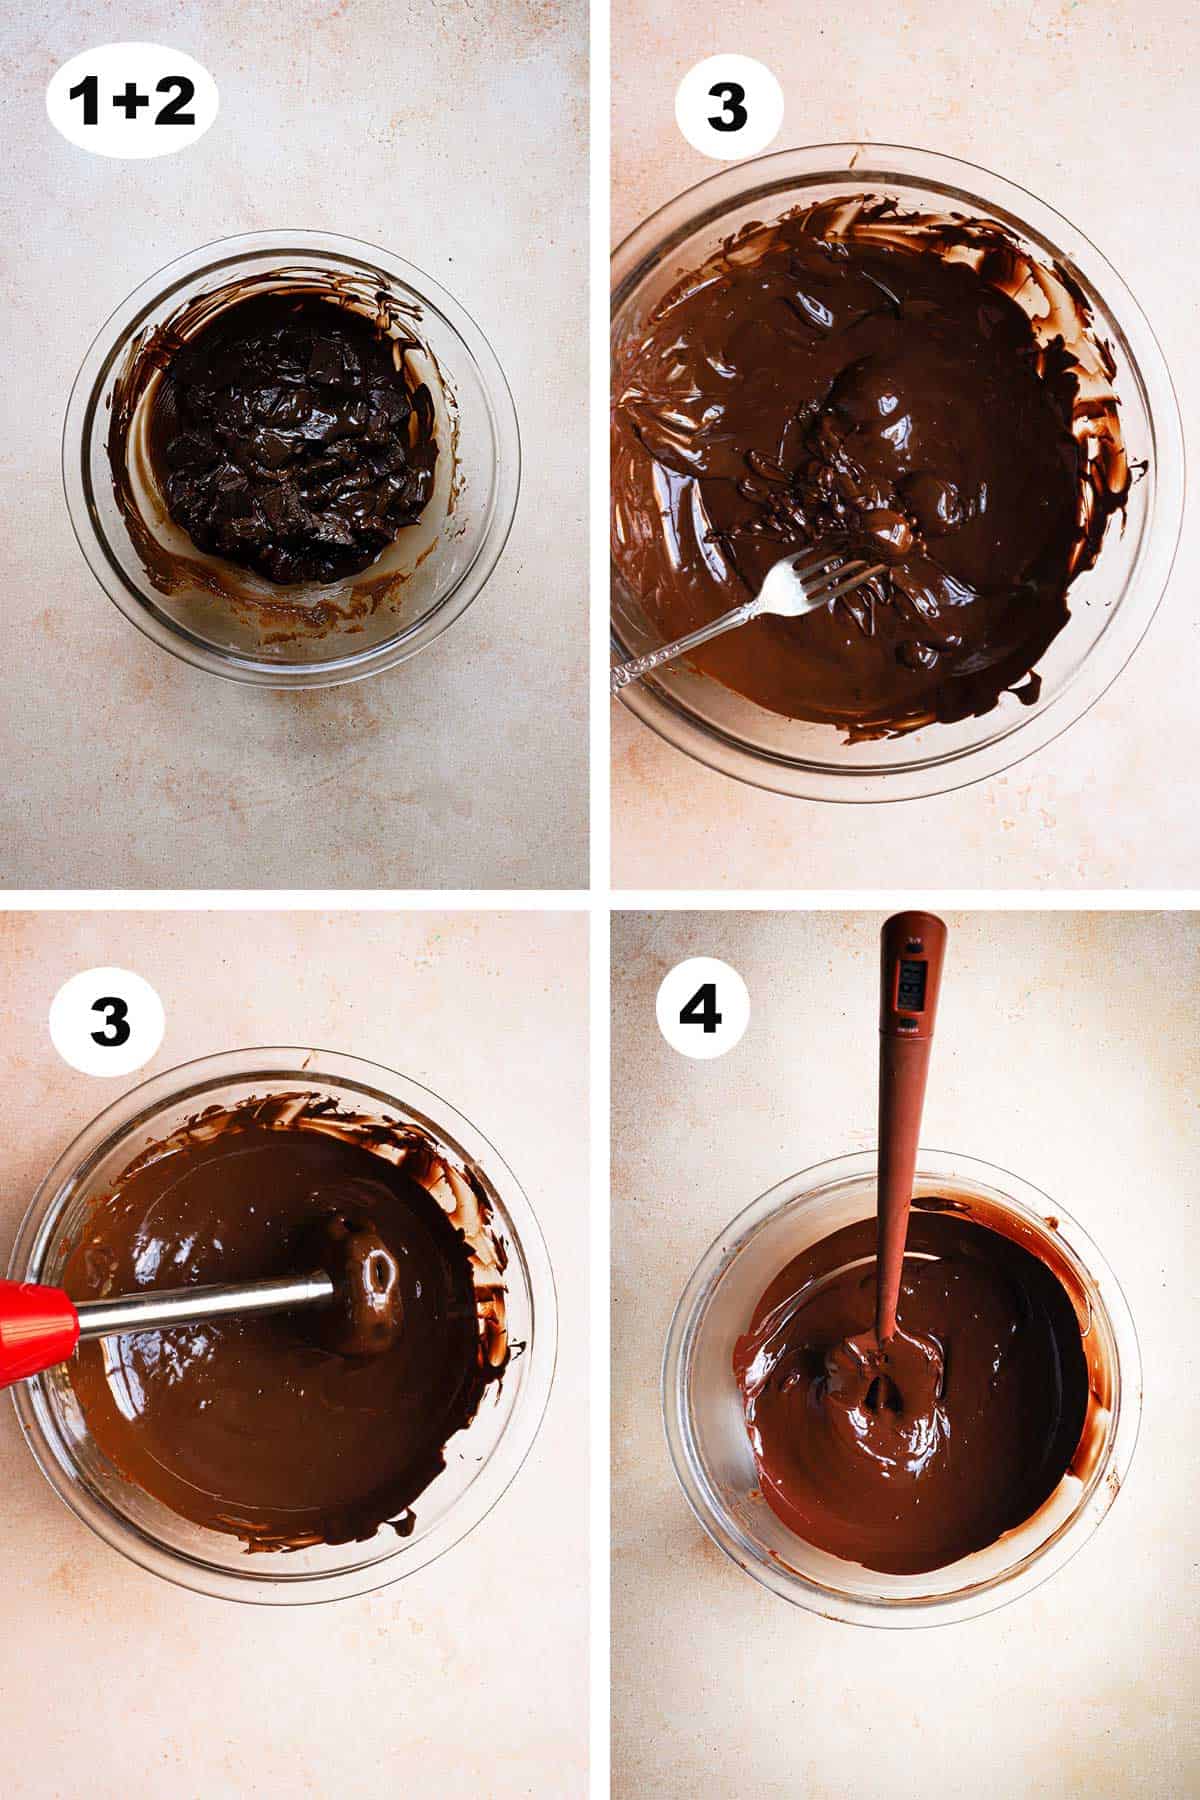 mostly melted chocolate in a bowl, a fork lifting a piece of unmelted chocolate, emergen blender in a bowl of melted chocolate, a spatula in a bowl of melted chocolate